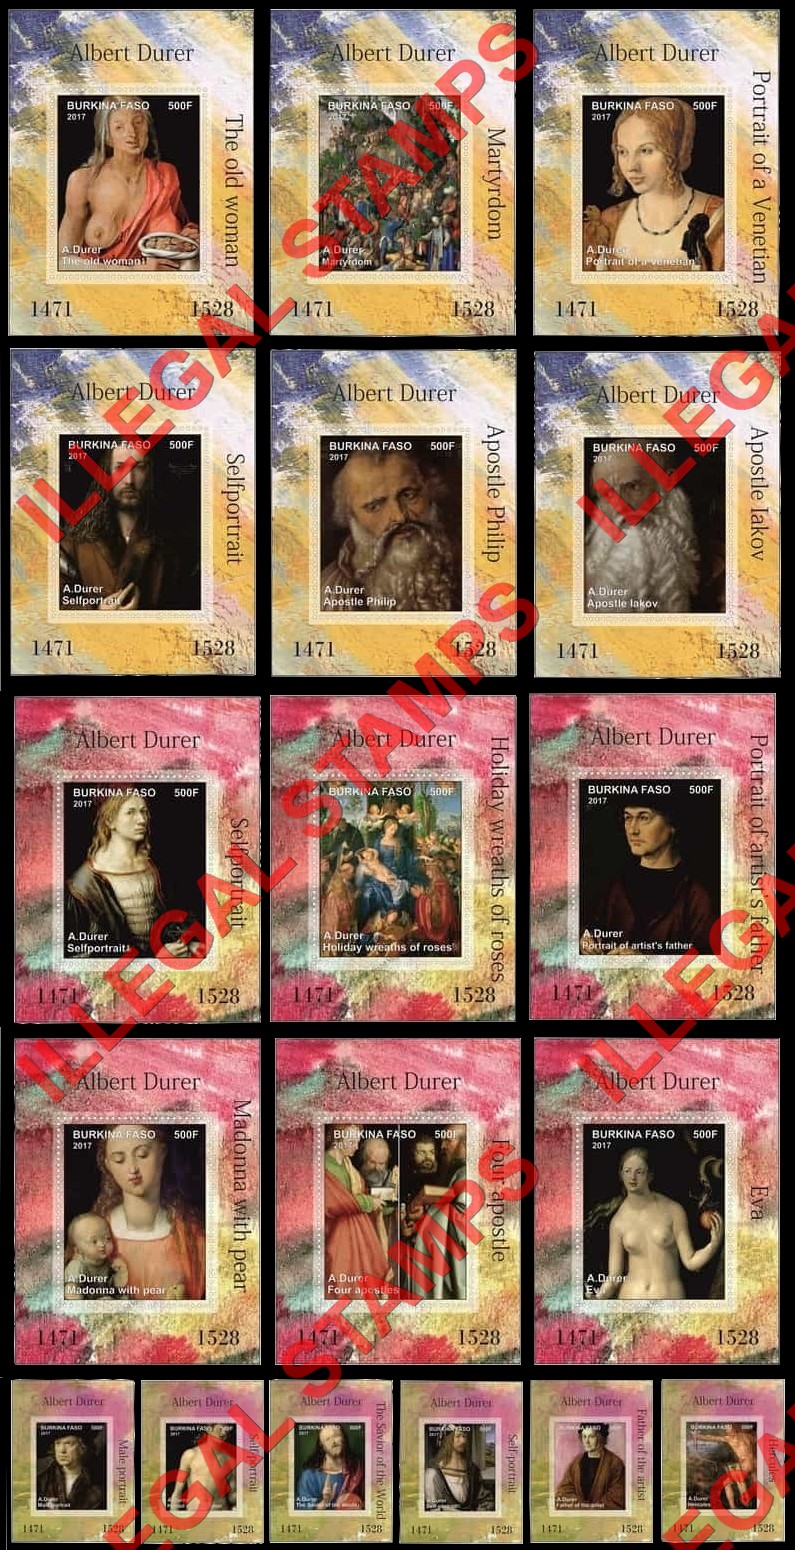 Burkina Faso 2017 Paintings by Albrecht Durer Illegal Stamp Deluxe Souvenir Sheets of 1